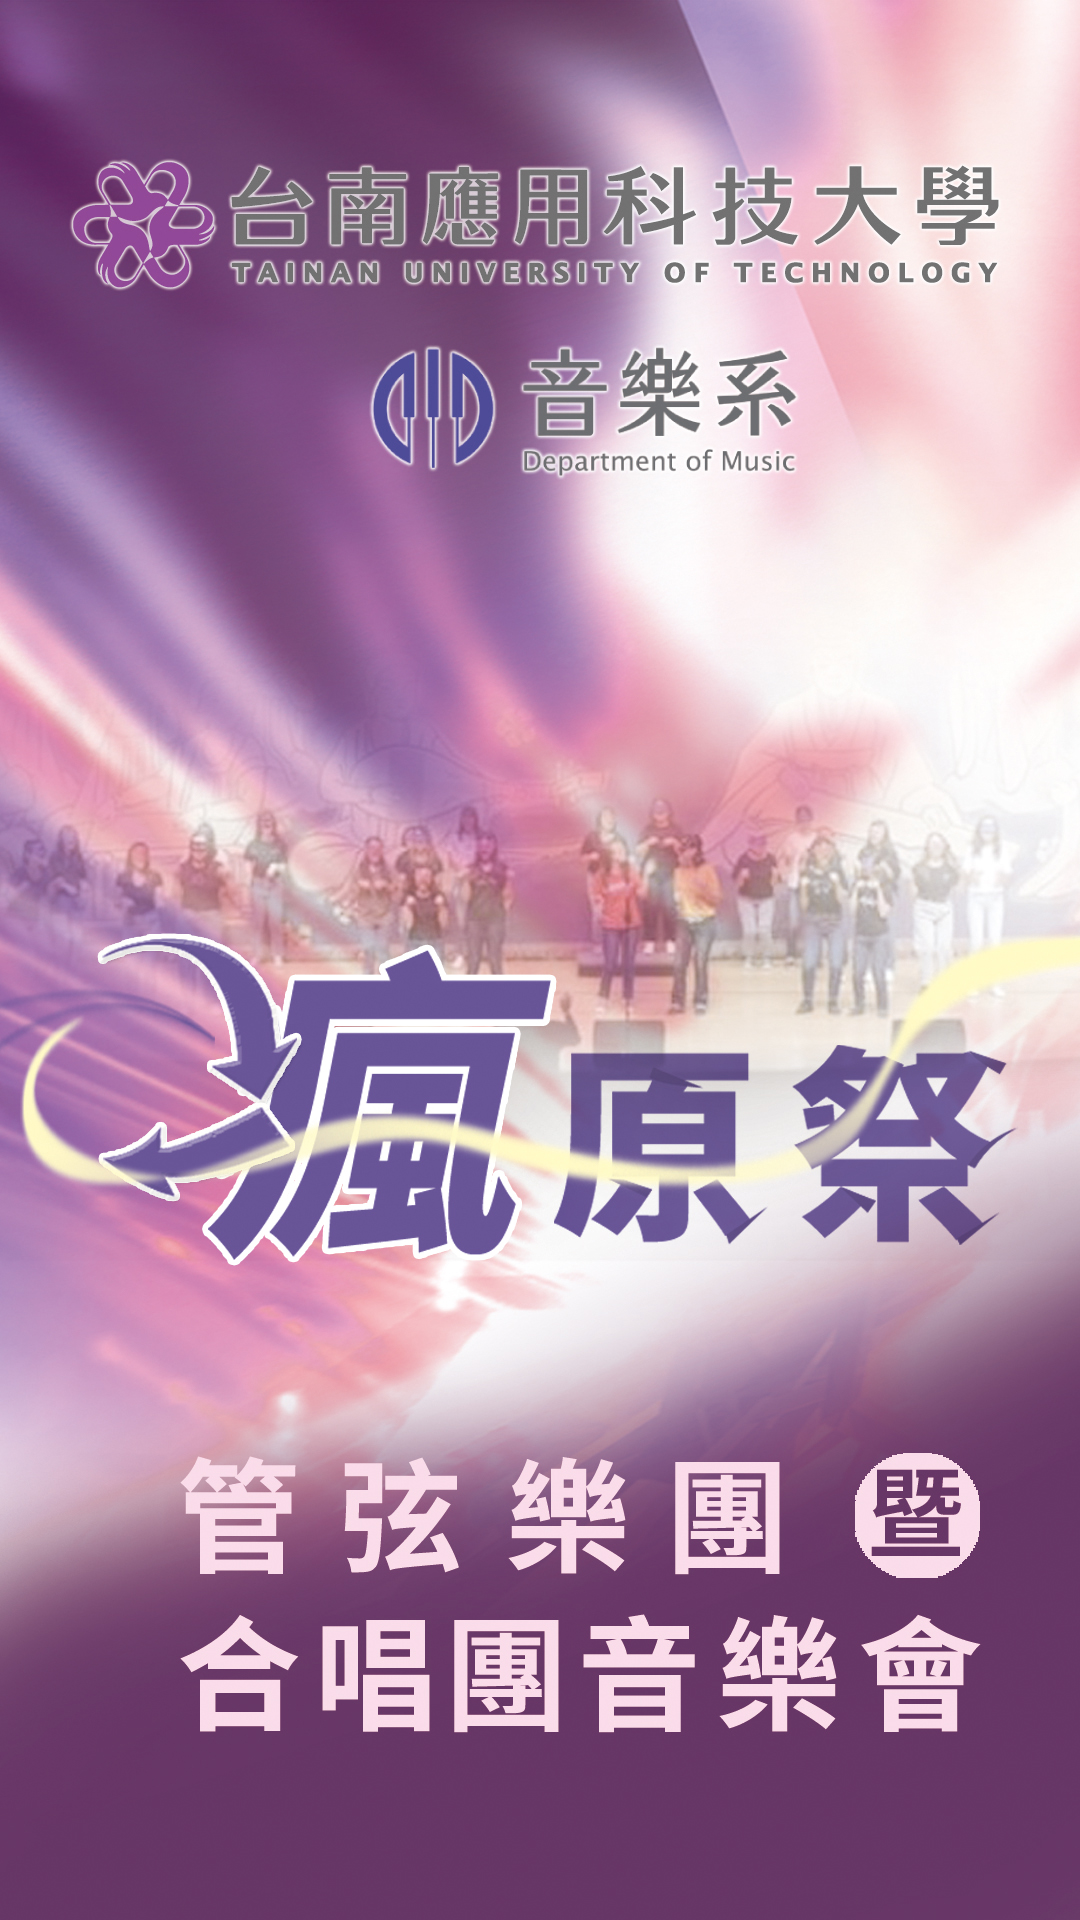 Department of Music, Tainan University of Technology Concert